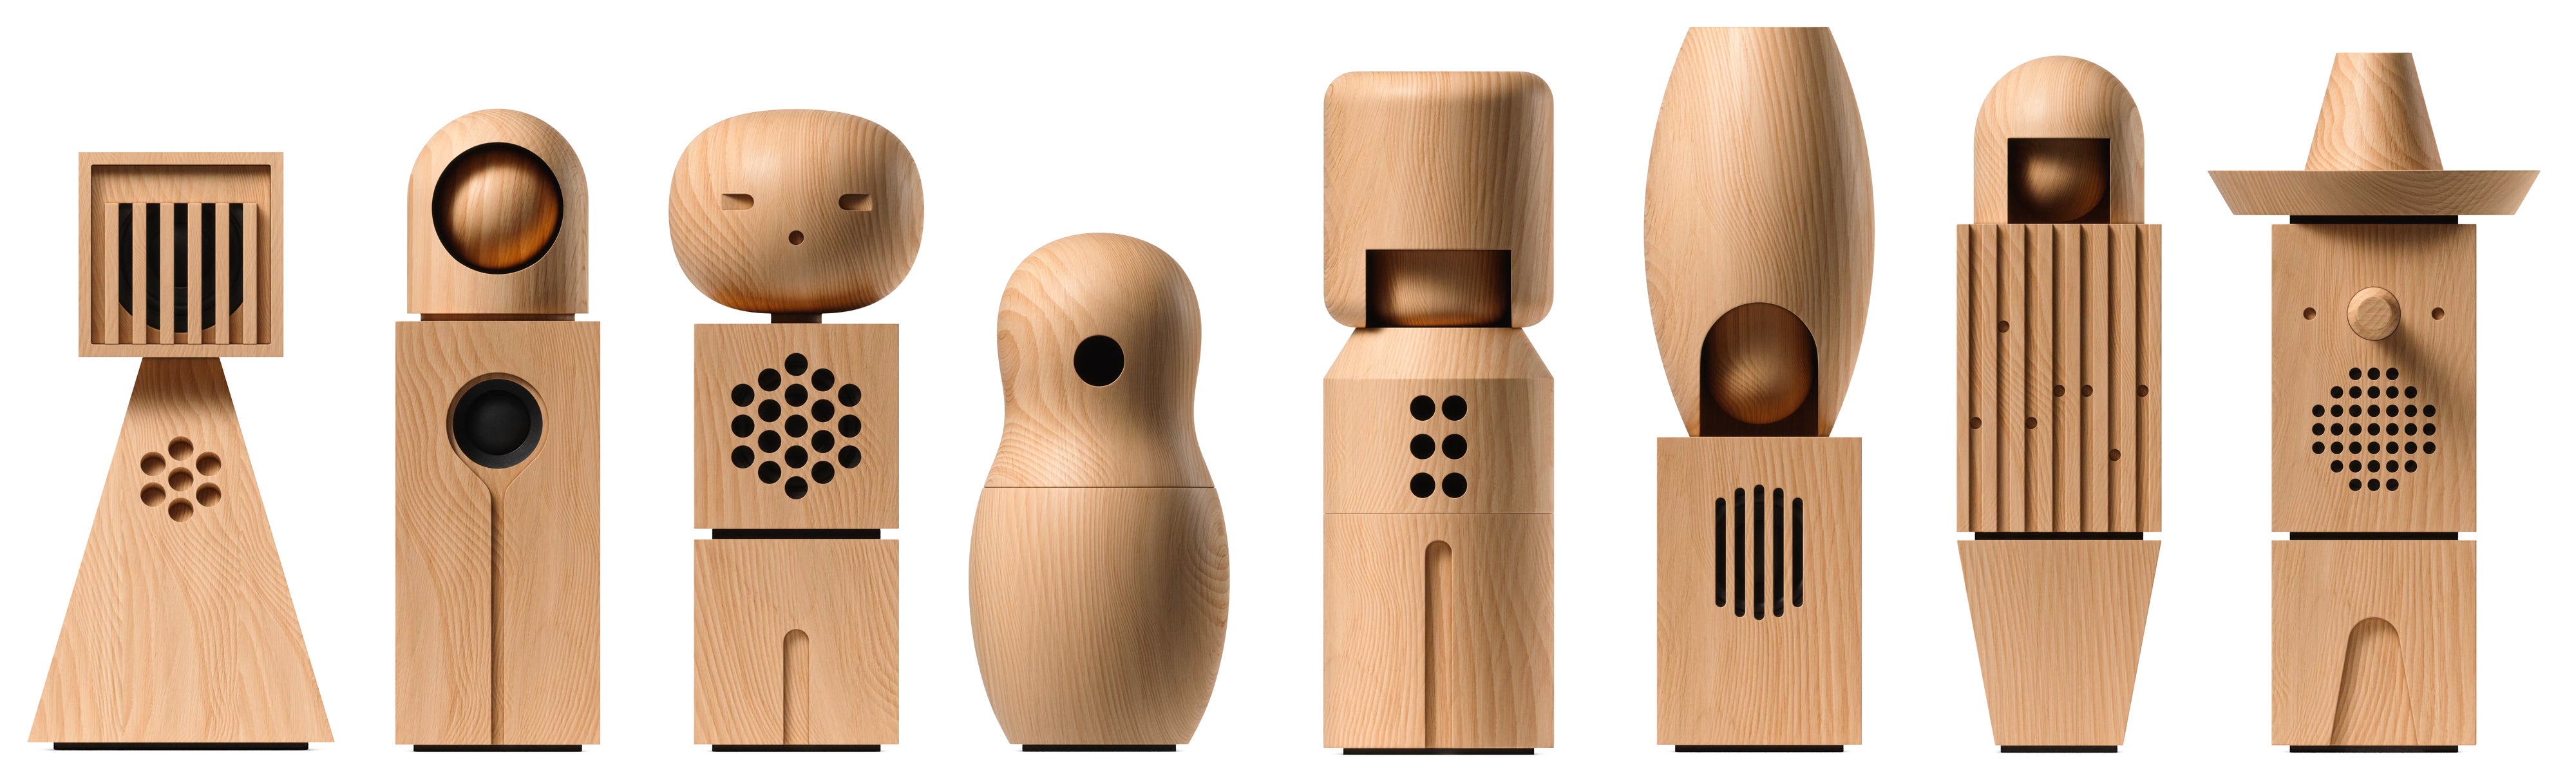 Teenage Engineering’s Latest Musical Toy is a $2,000 Collection of Singing Wooden Dolls